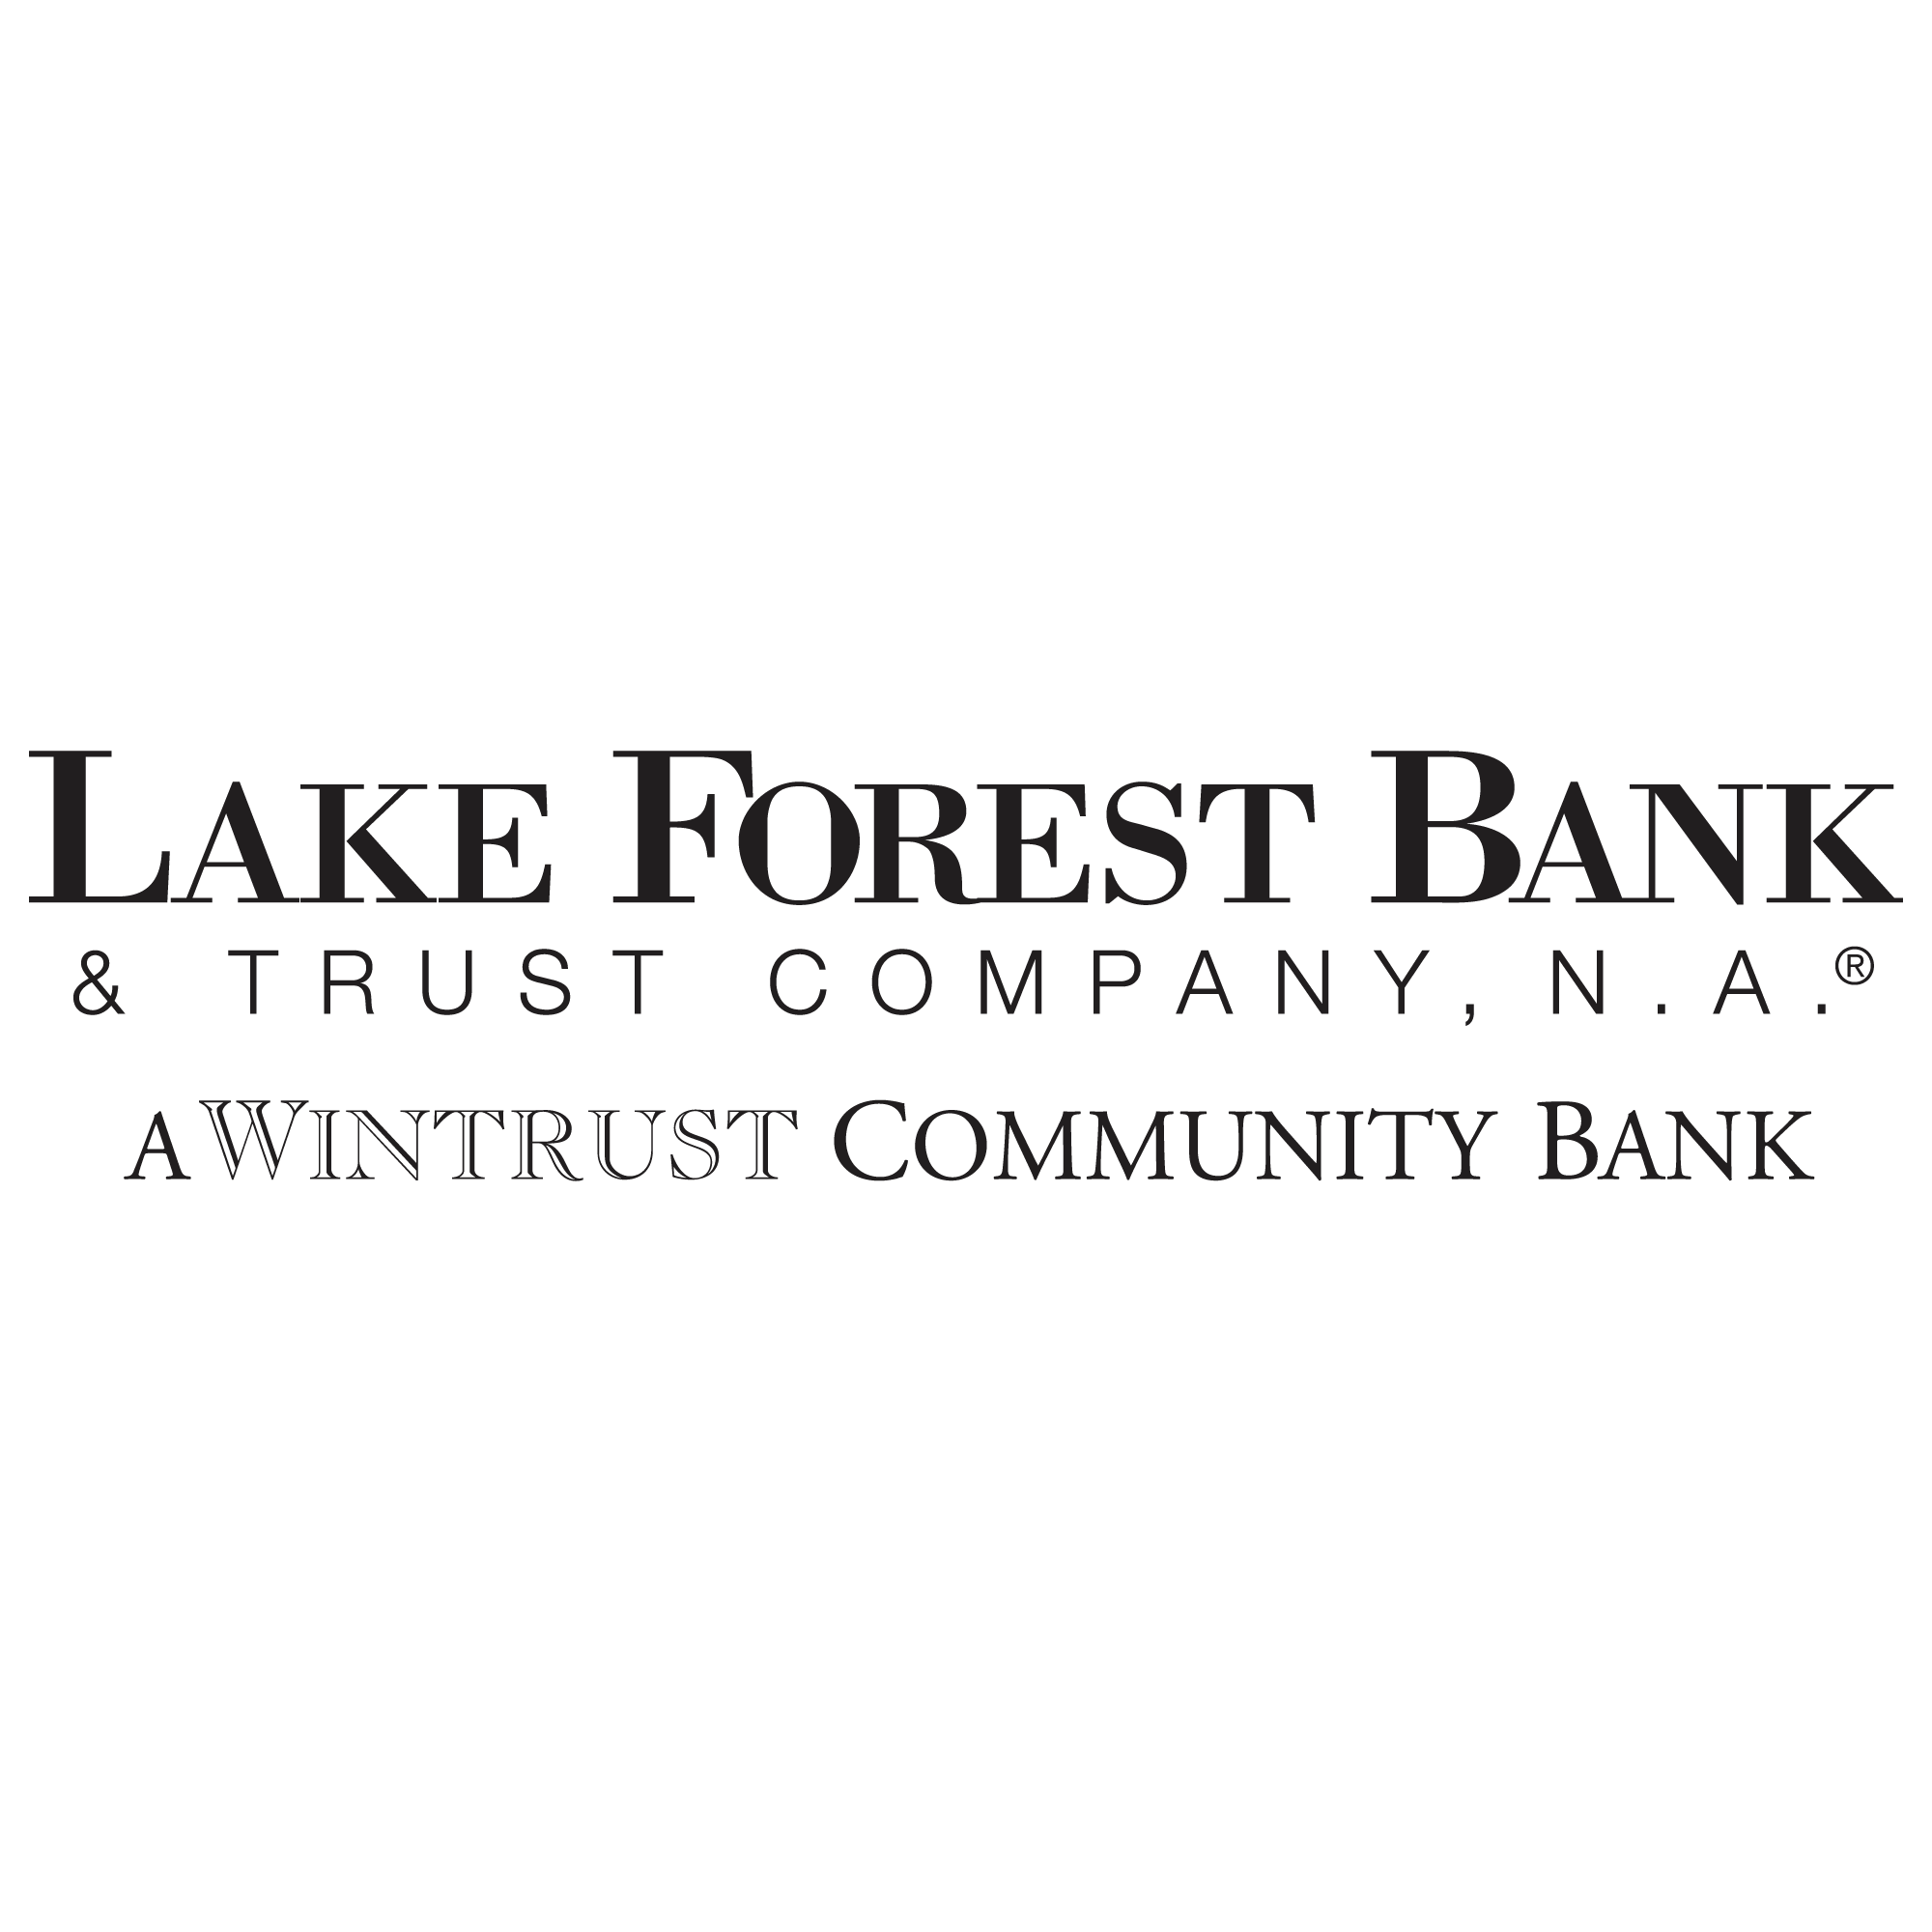 Lake Forest Bank & Trust